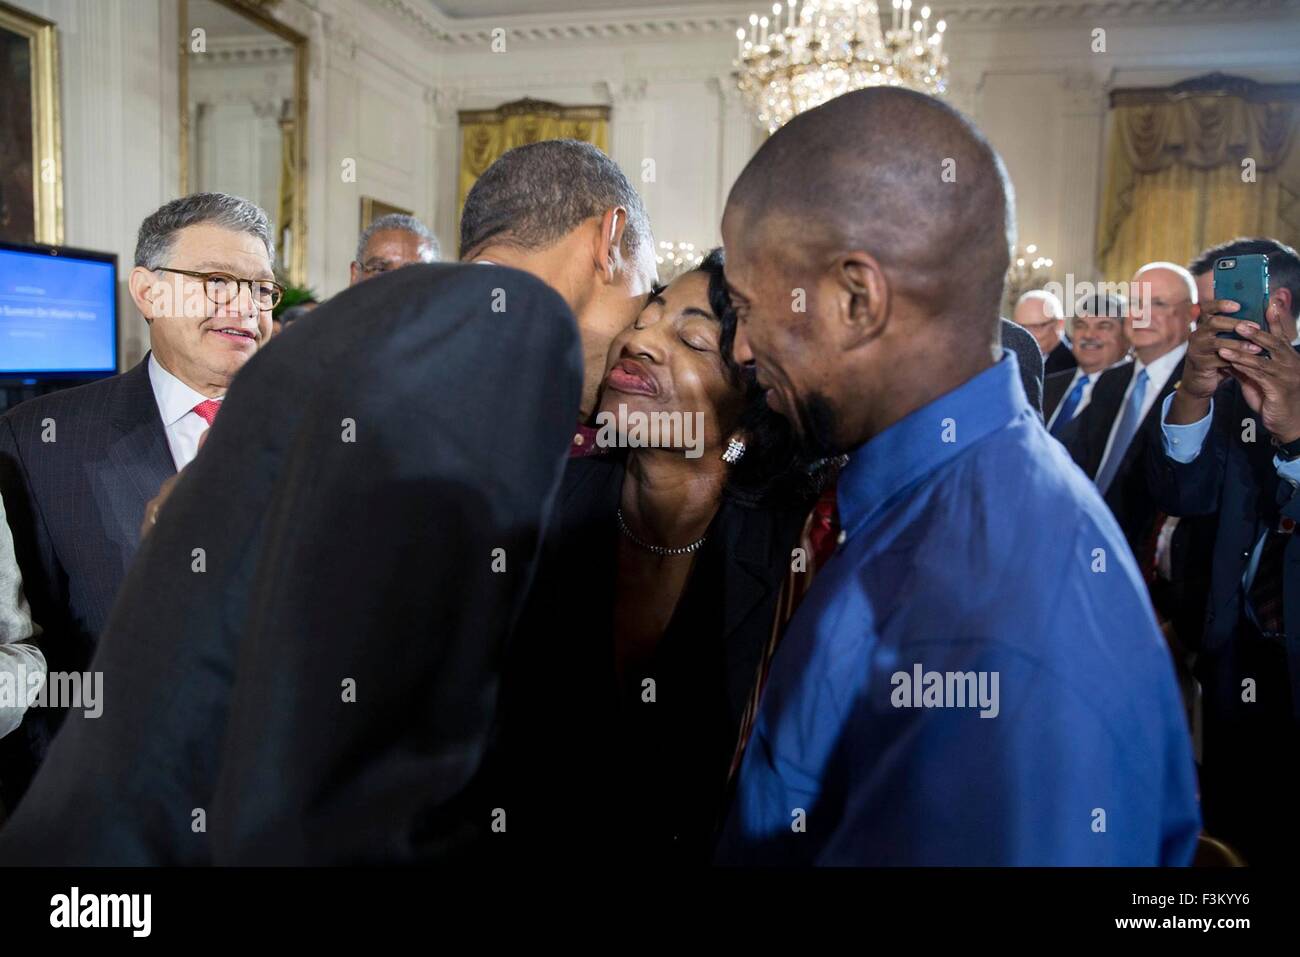 Washington DC, USA. 7th October, 2015. U.S. President Barack Obama gives Joann Wise a kiss after her son Terrence (right) introduced the president at the White House Summit on Worker Voice in the East Room October 7, 2015 in Washington, DC. The Wise family are multiple generations of fast food workers and are now organizing workers to push for higher wages. Stock Photo